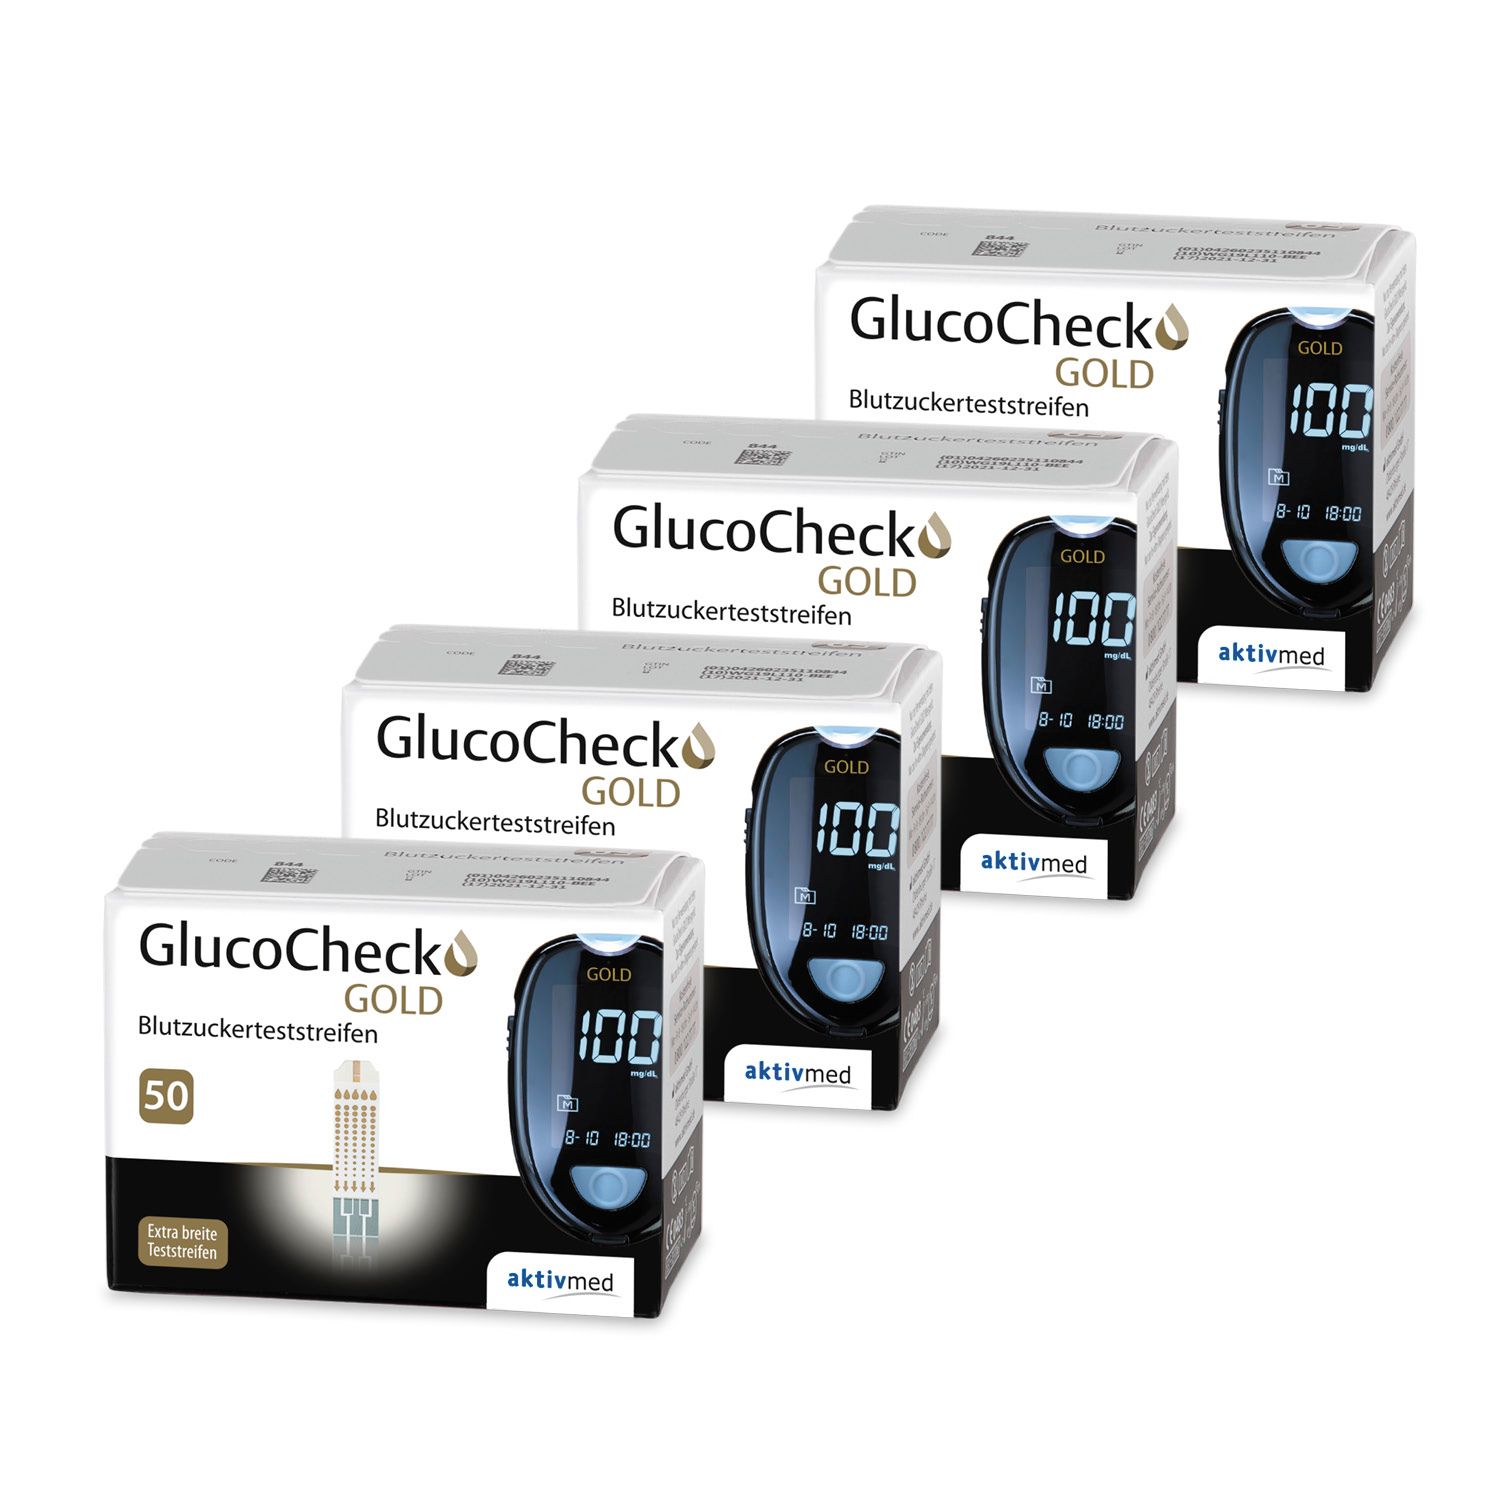 Glucocheck gold test strip (200 pieces) for blood sugar control in diabetes